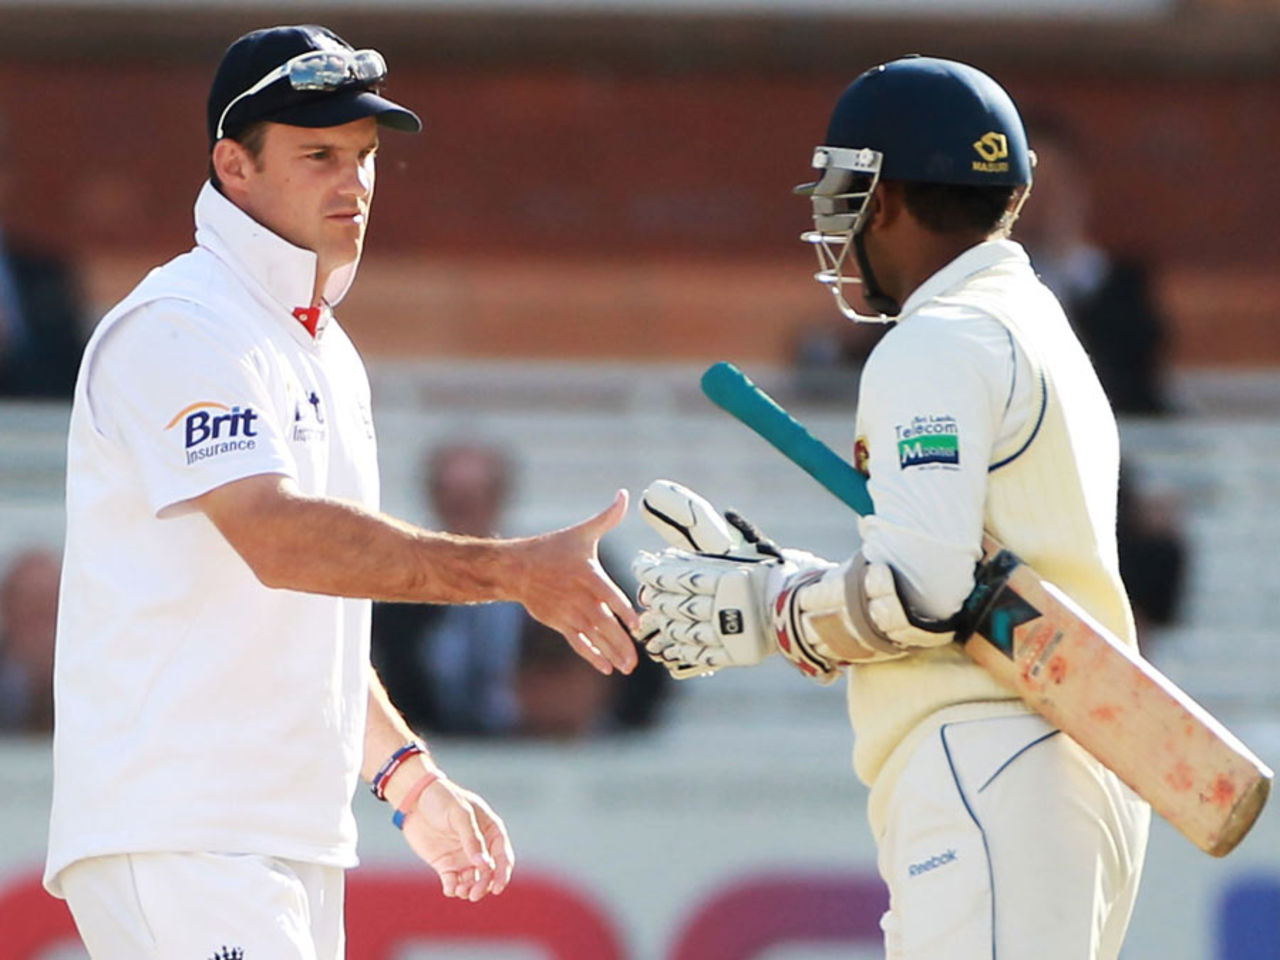 Andrew Strauss shakes hands with Prasanna Jayawardene to indicate the end of the match, England v Sri Lanka, 2nd Test, Lord's, 5th day, June 7, 2011